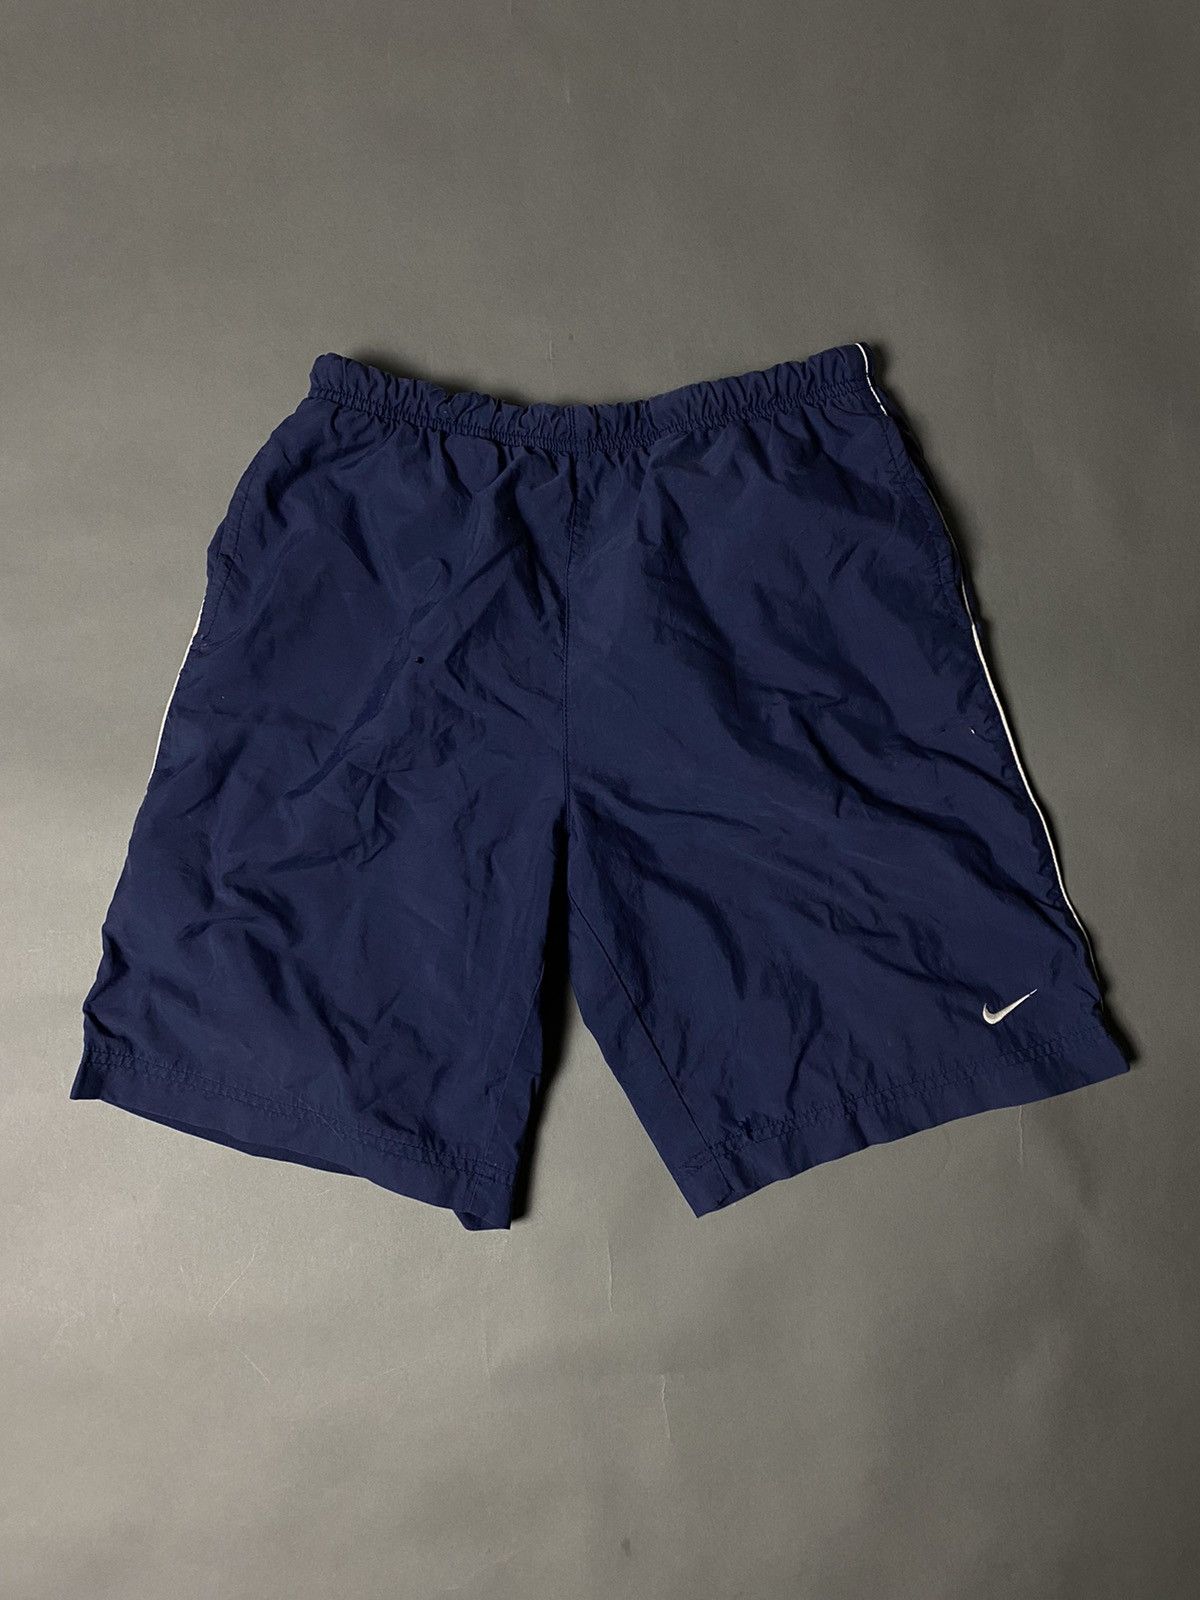 Pre-owned Nike X Vintage Nike Vintage Navy Small Swoosh Shorts Track Pants 2000s